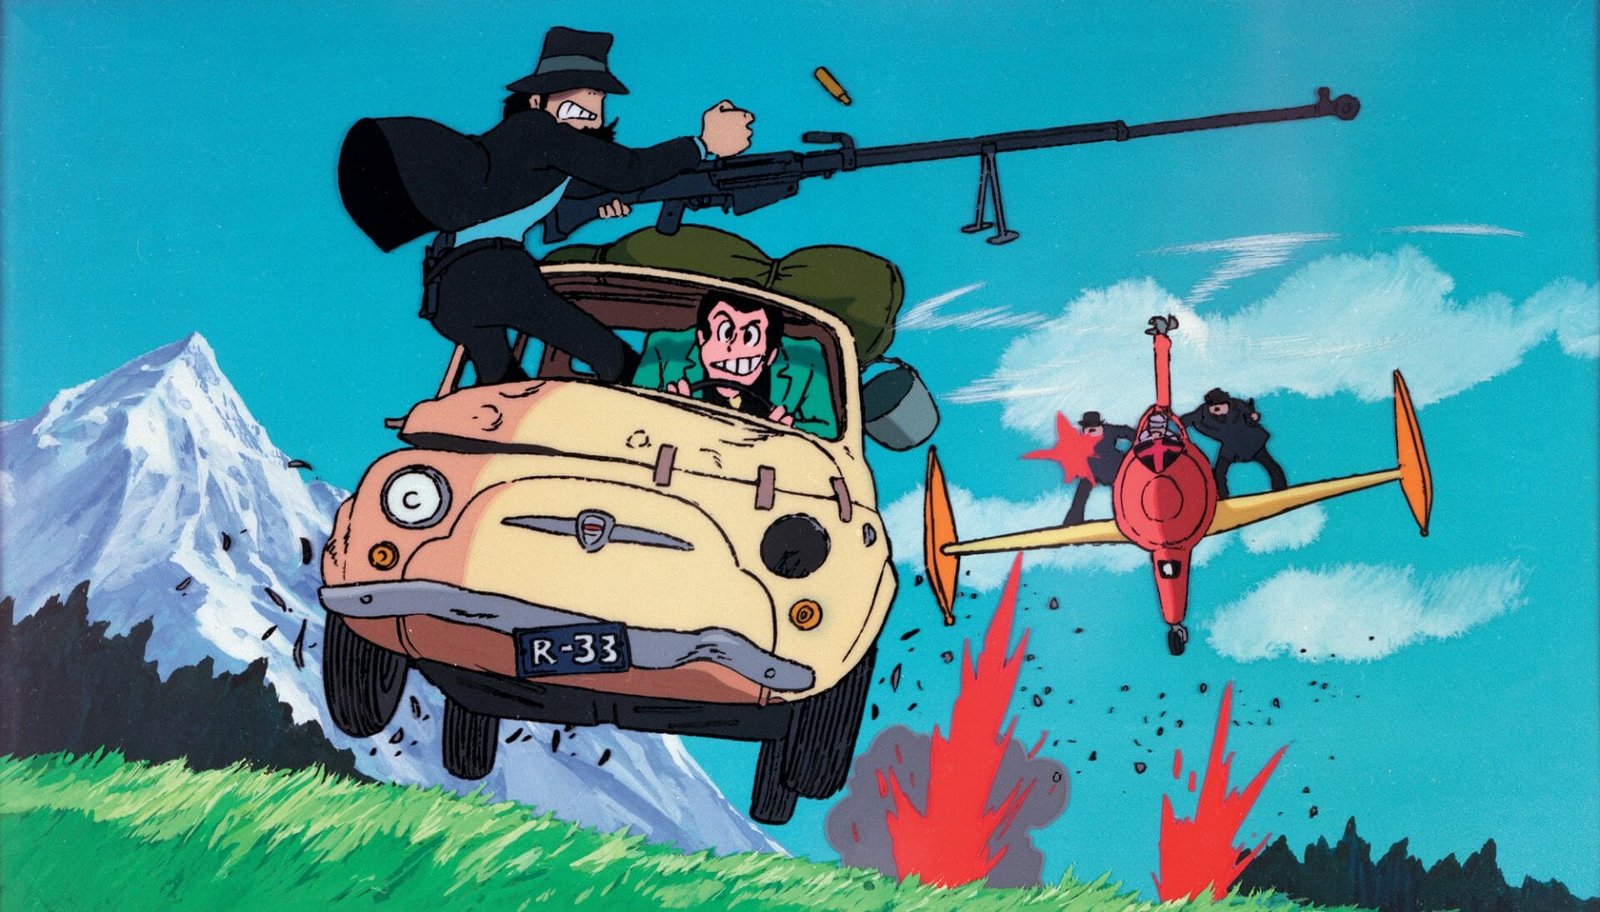 Netflix Animated Movies: The Castle of Cagliostro